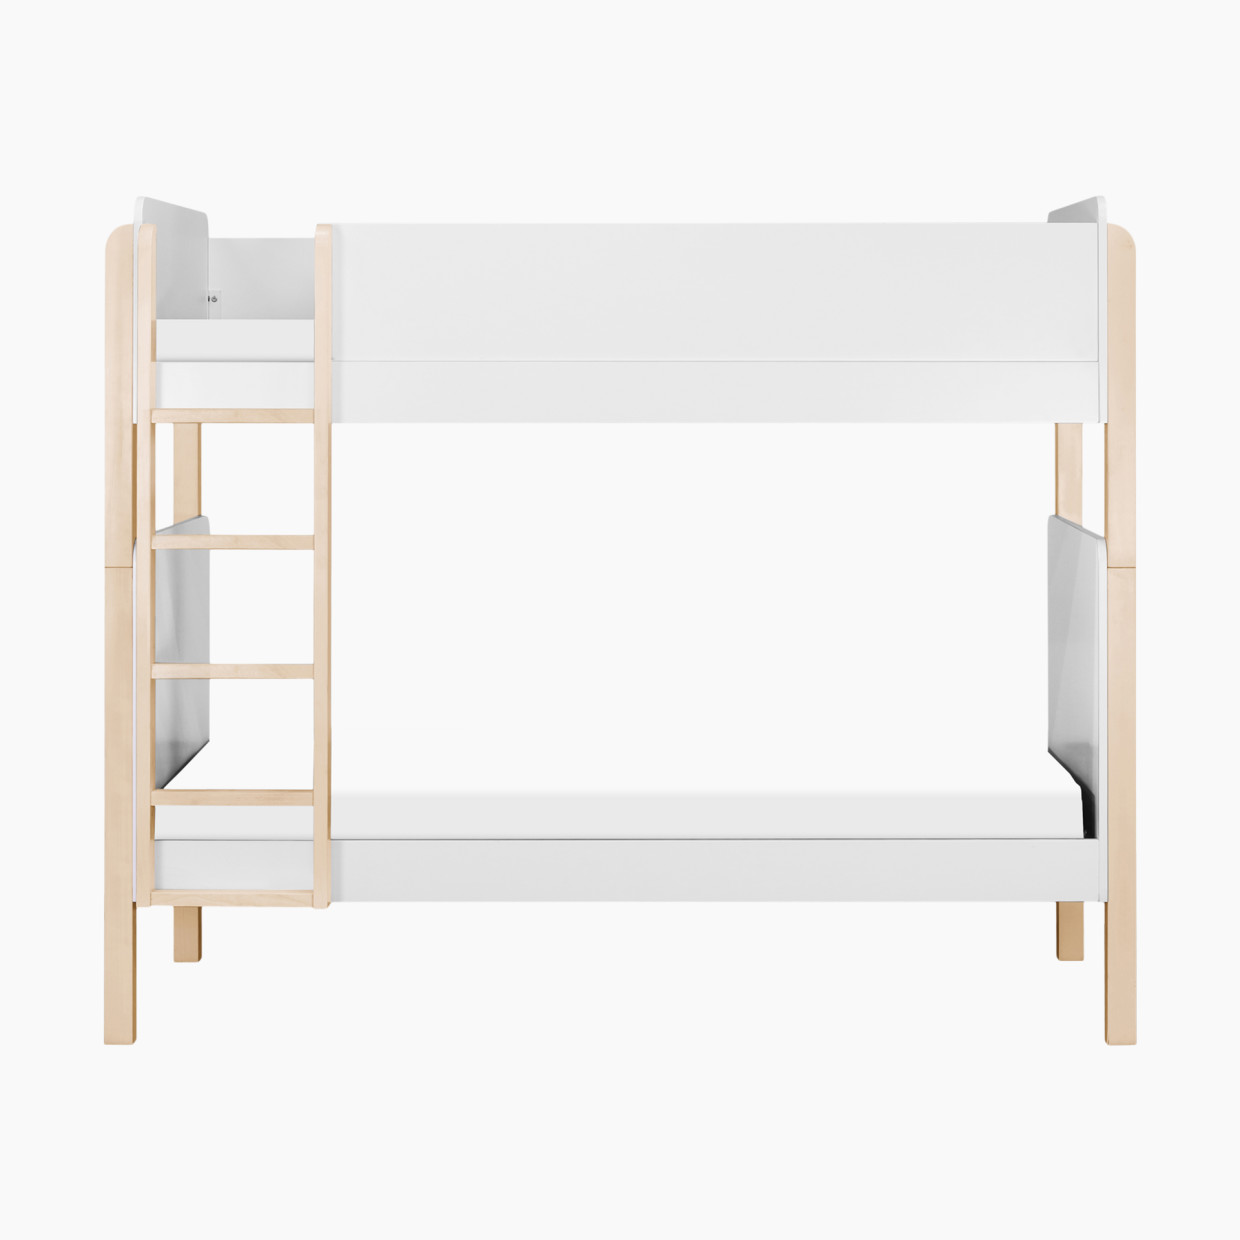 babyletto TipToe Bunk Bed - White / Washed Natural.